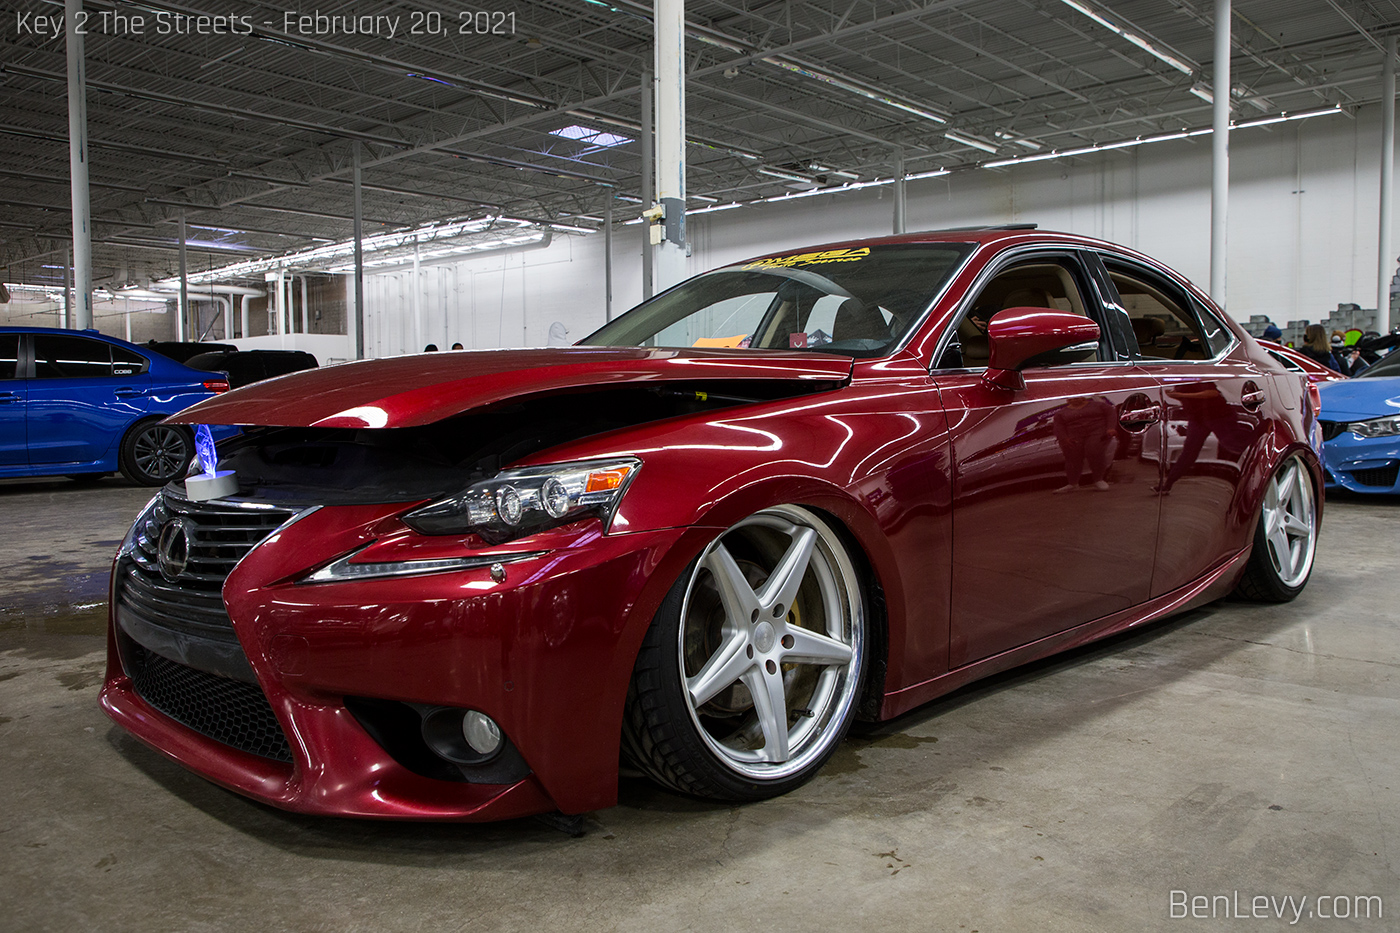 Bagged Red Lexus IS 250